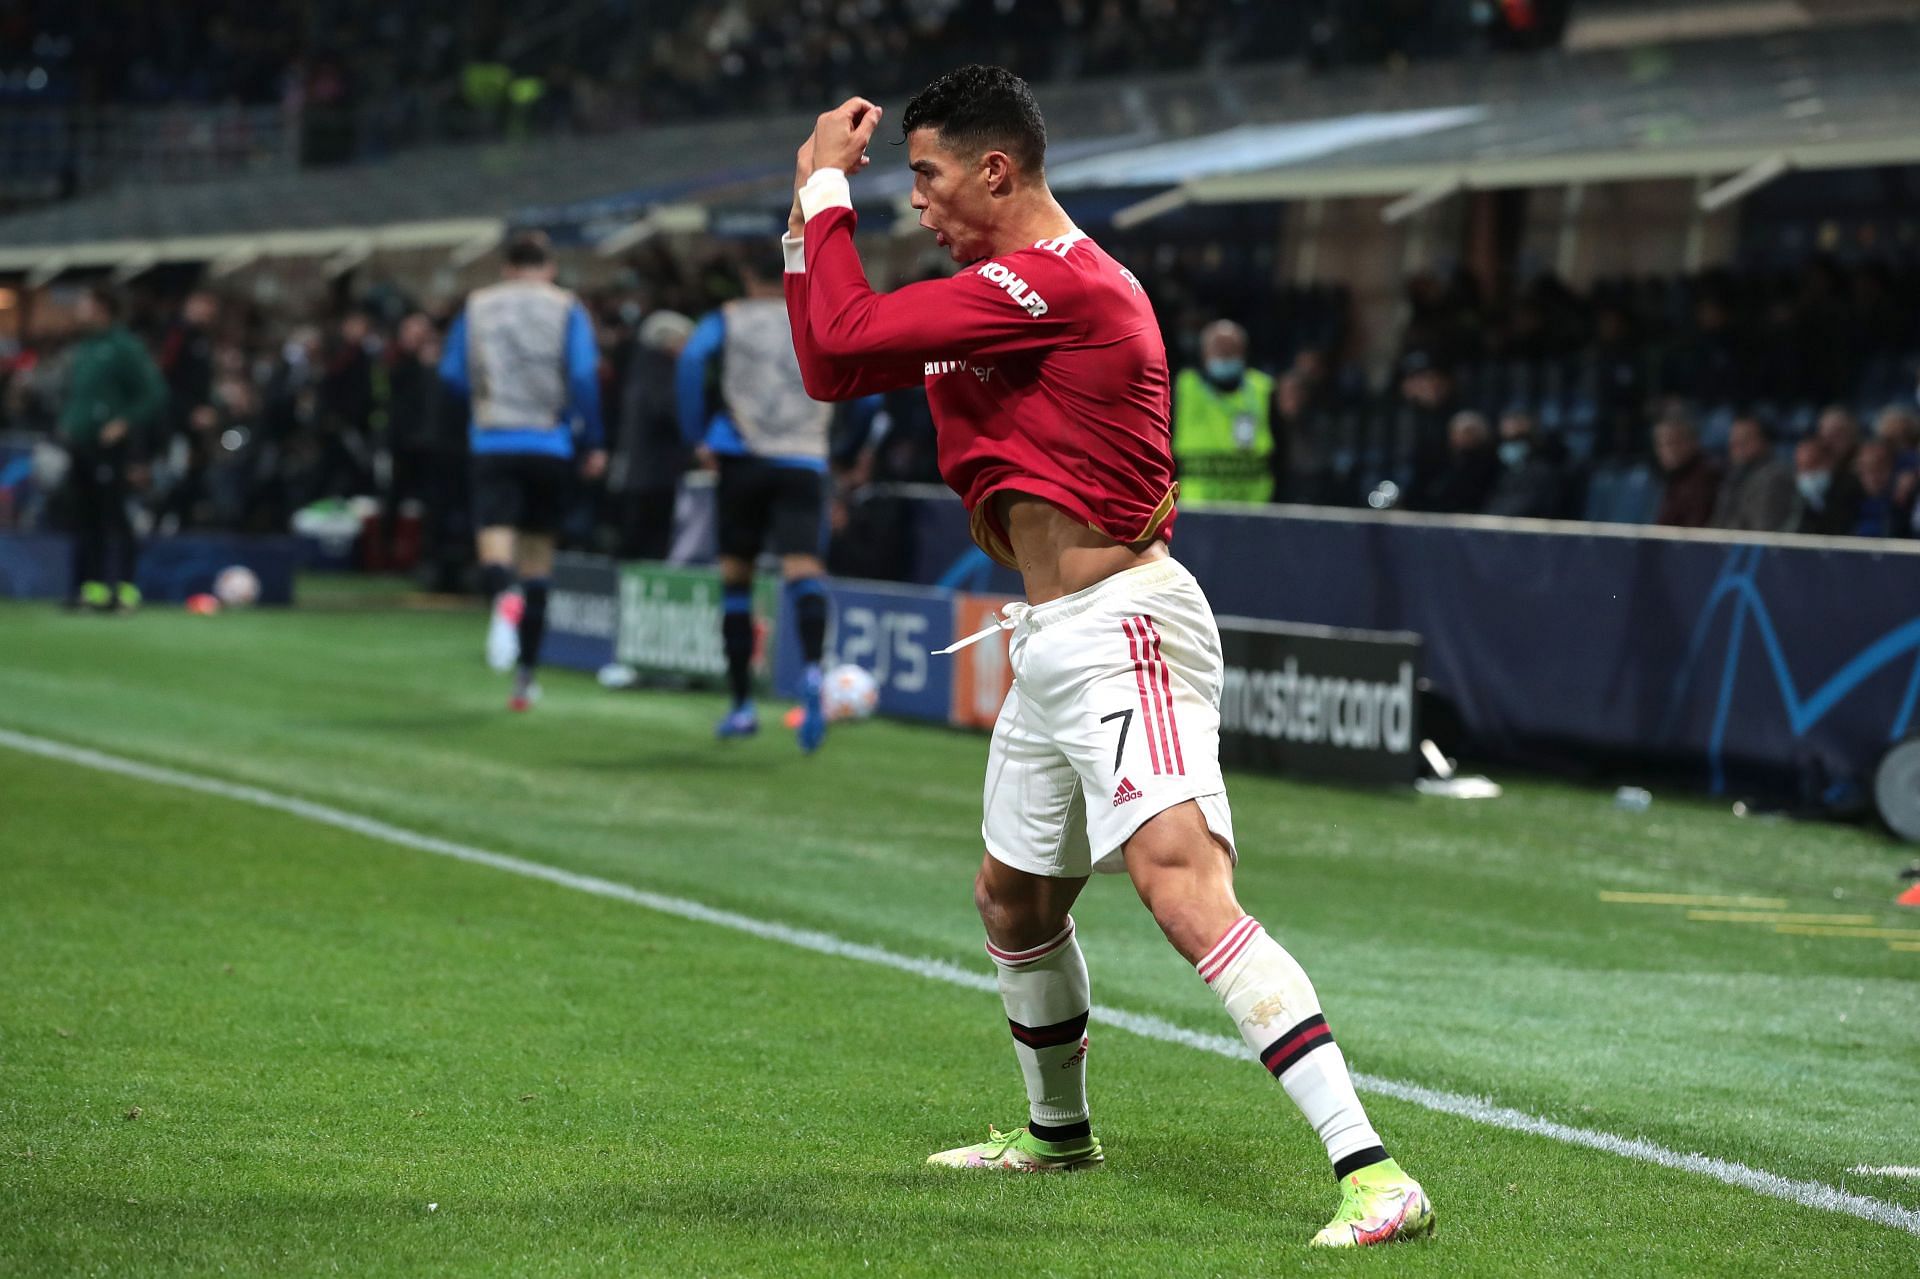 Cristiano Ronaldo doing his siuu jubilation after scoring for Manchester United against Atalanta in the Champions League in November 2021